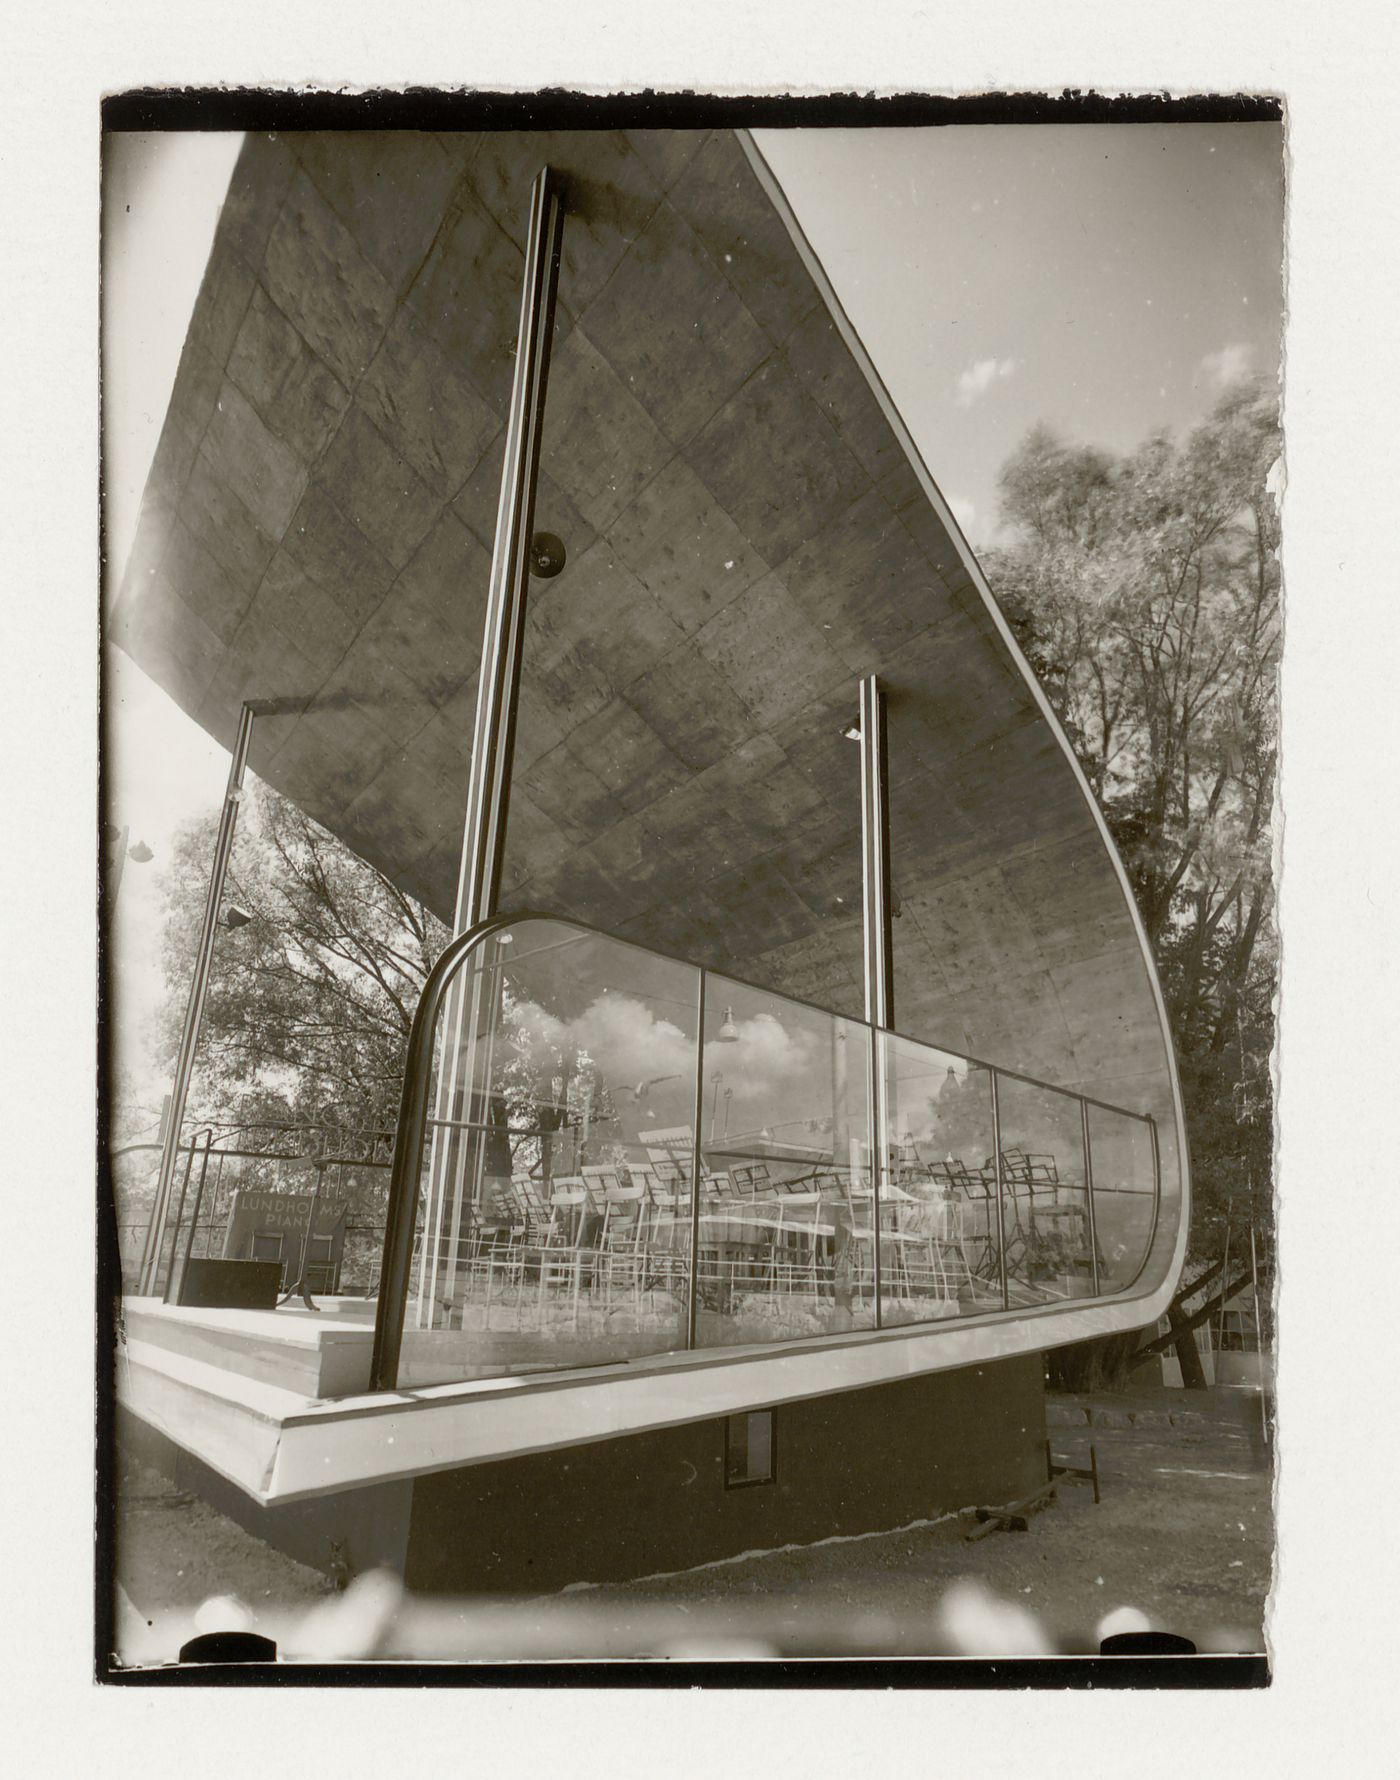 Exterior view of a bandstand at the Stockholm Exhibition of 1930 showing chairs and music stands, Stockholm